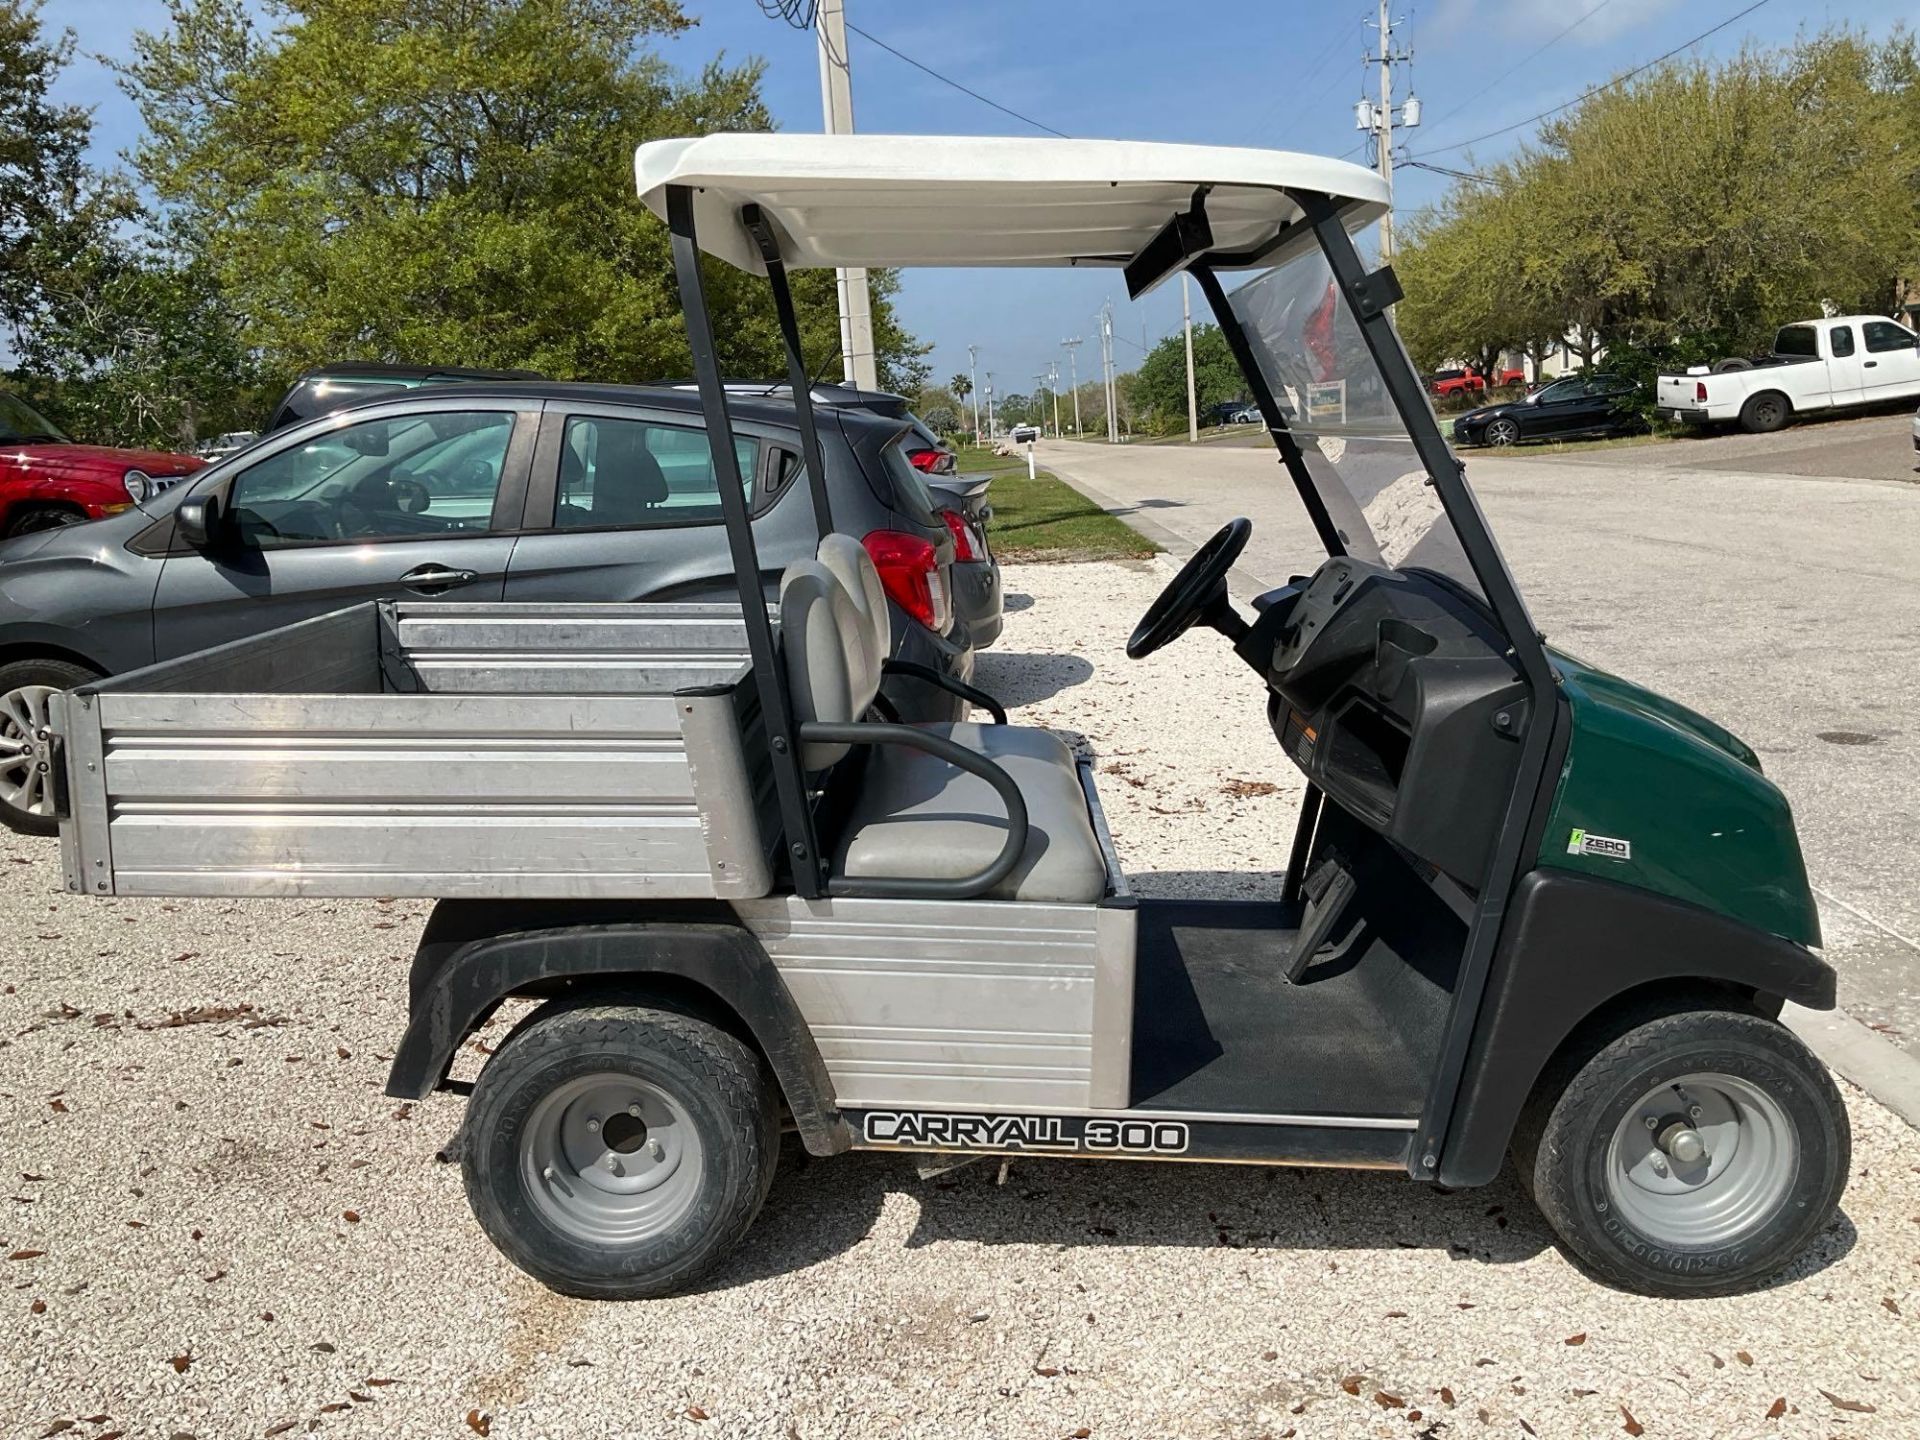 2018 CLUB CAR CARRYALL 300 ATV MODEL CA300 , ELECTRIC , MANUEL DUMP BED, BATTERY CHARGER INCLUDED... - Image 2 of 13